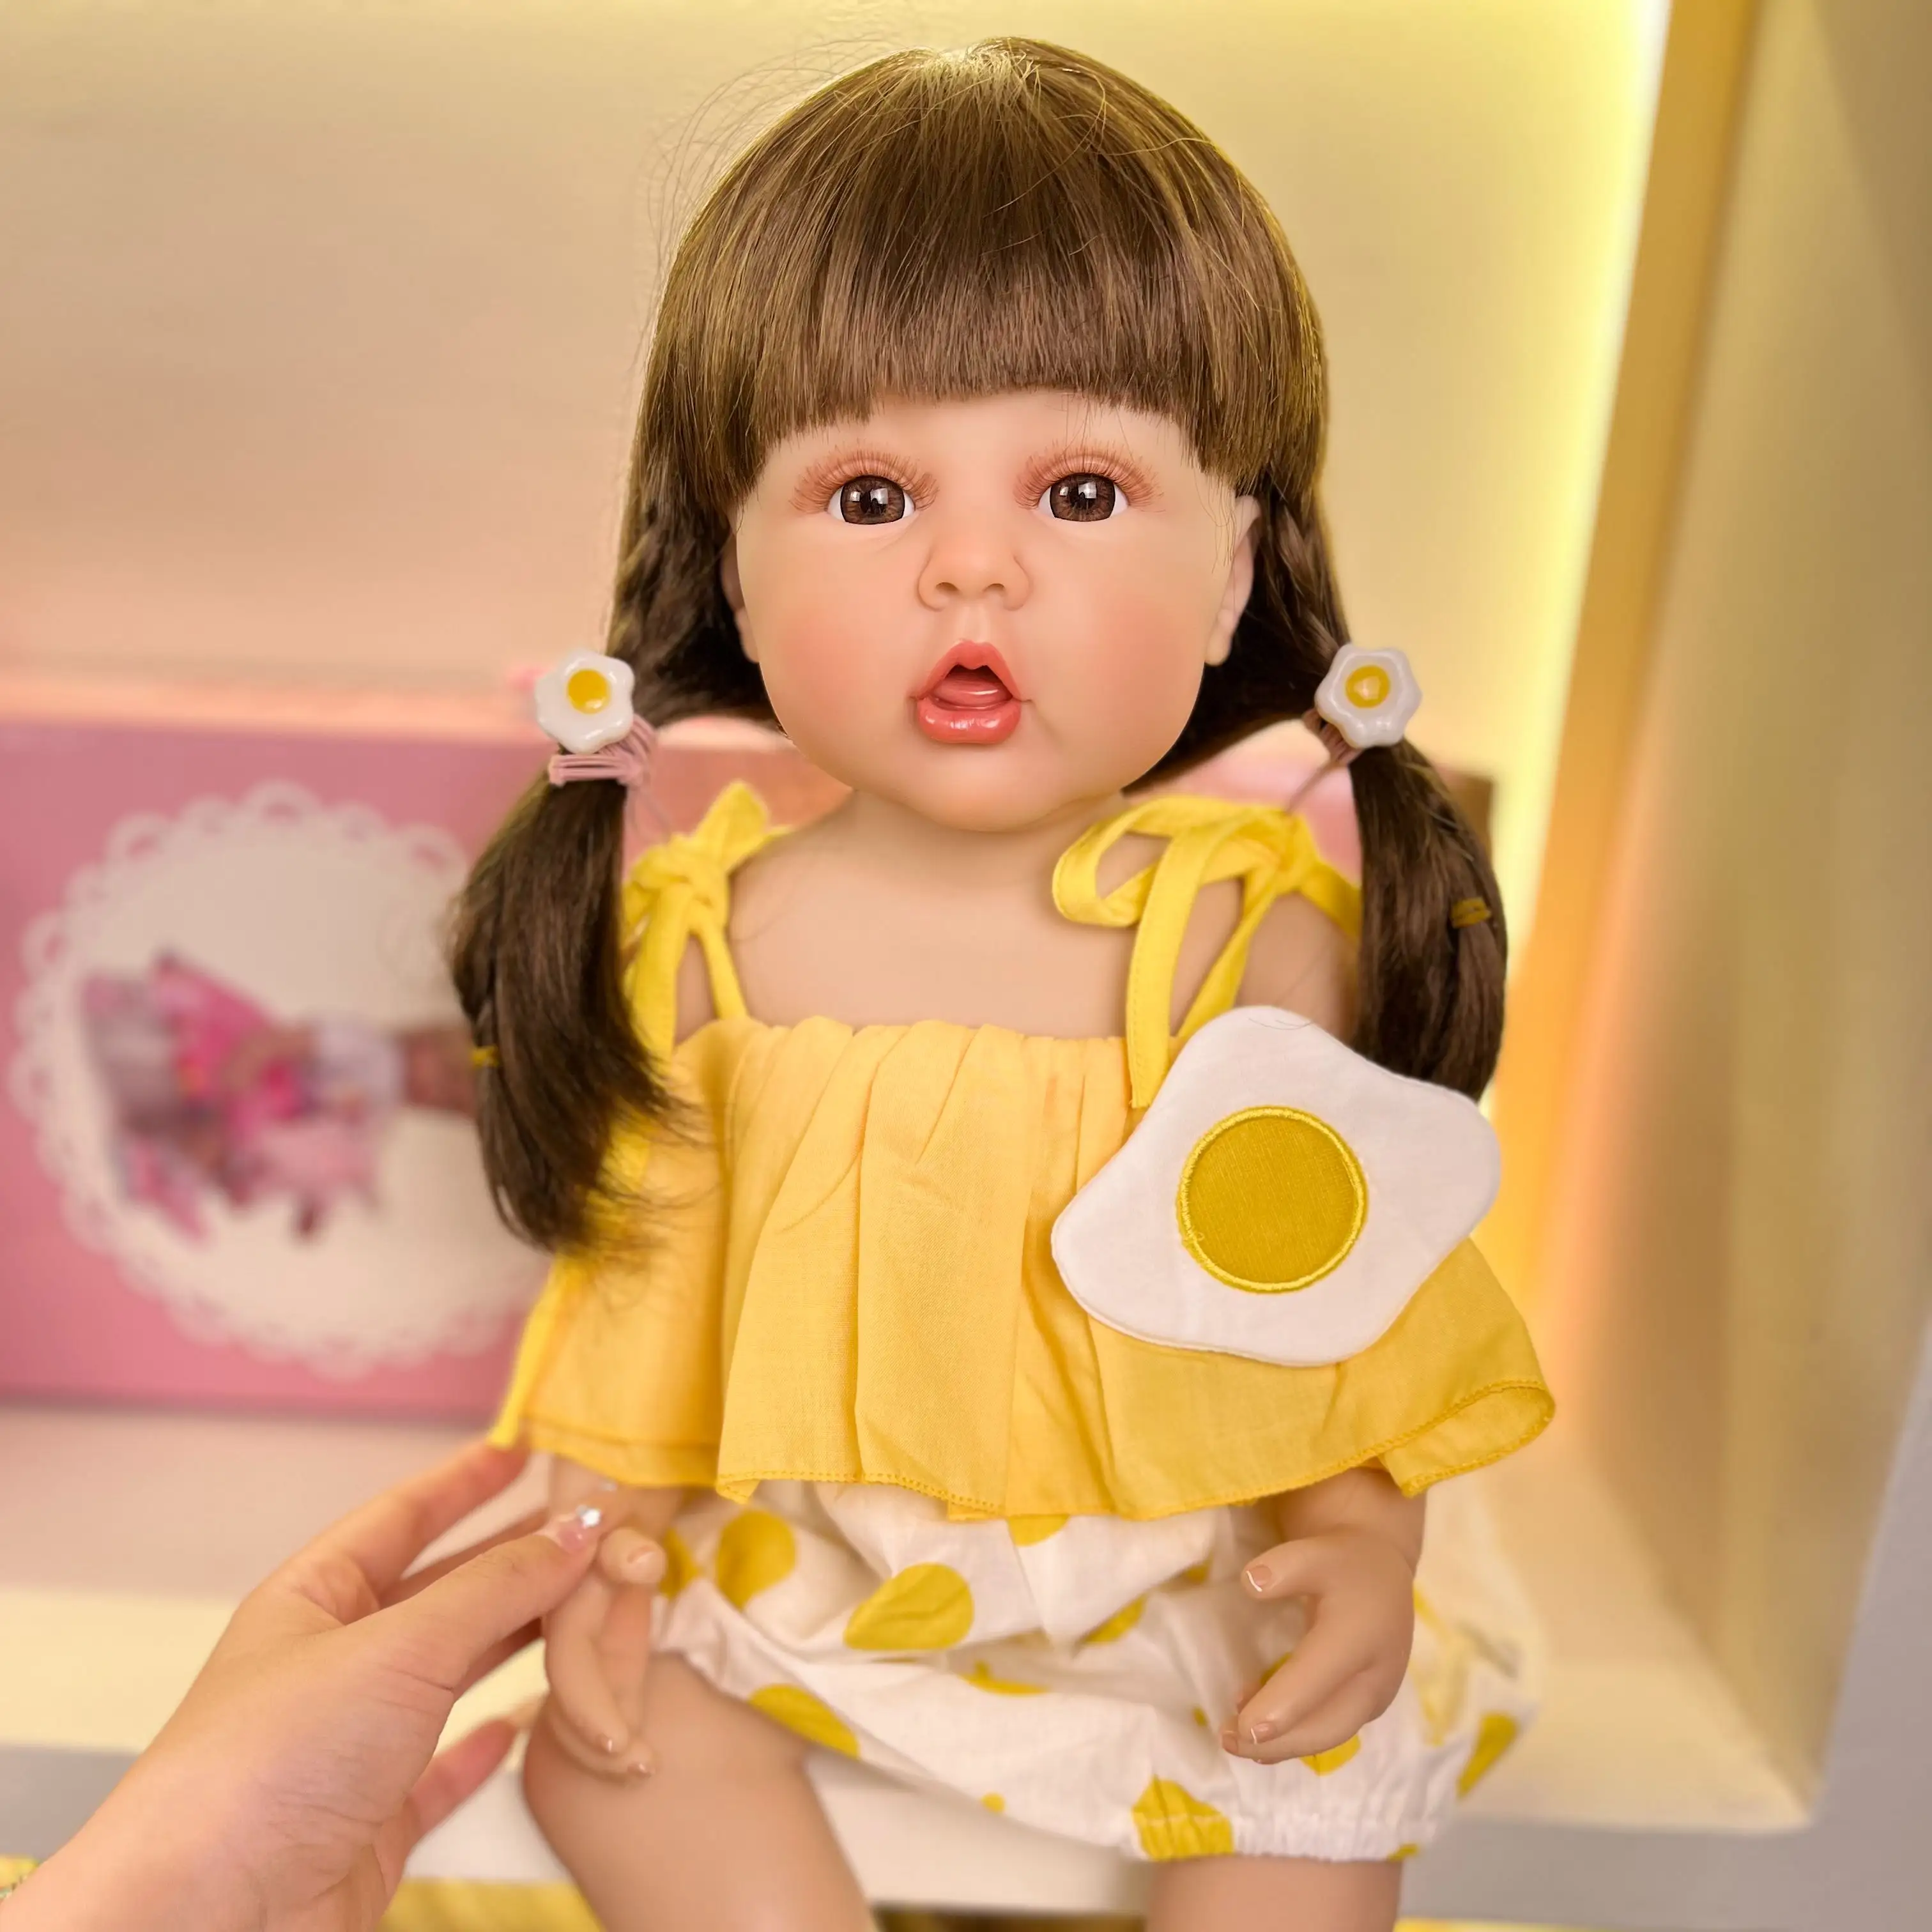 24inch Life reborn wholesale lifelike 55 cm bebe soft silicone doll baby reborn with golden curls artificial big doll